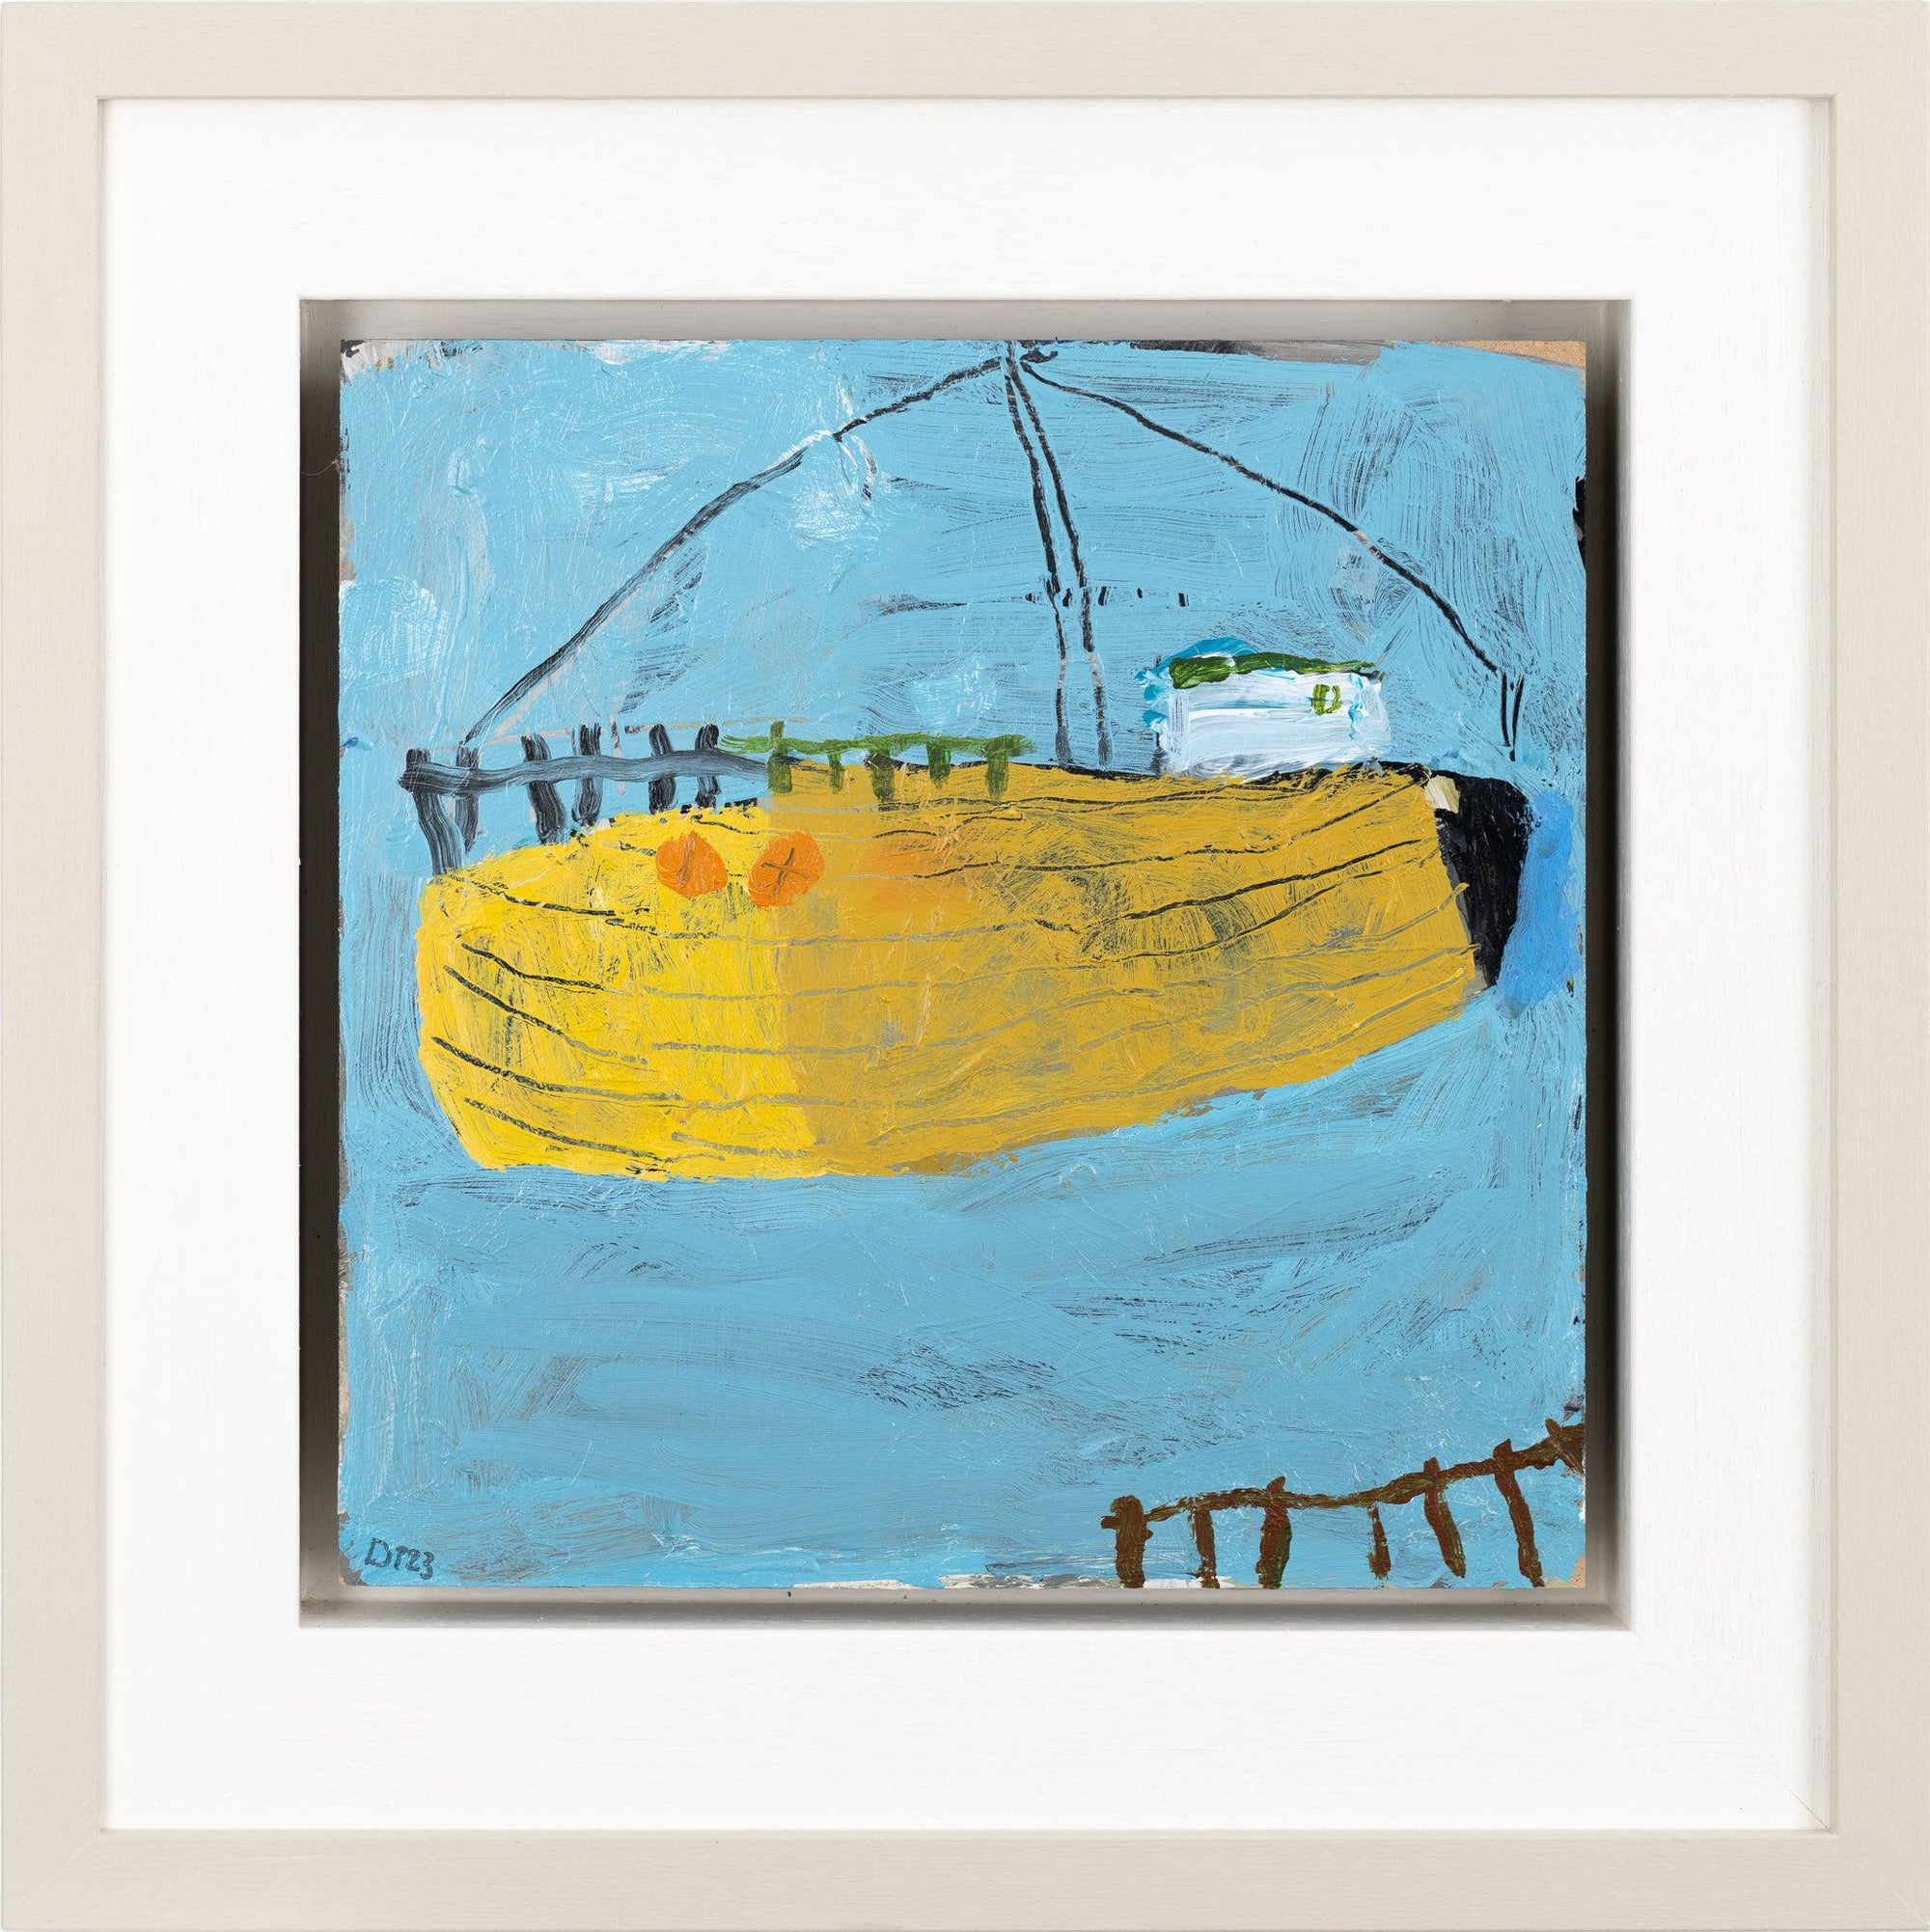 'Yellow Voyager' mixed media original on panel by David Pearce fine art, available at Padstow Gallery, Cornwall